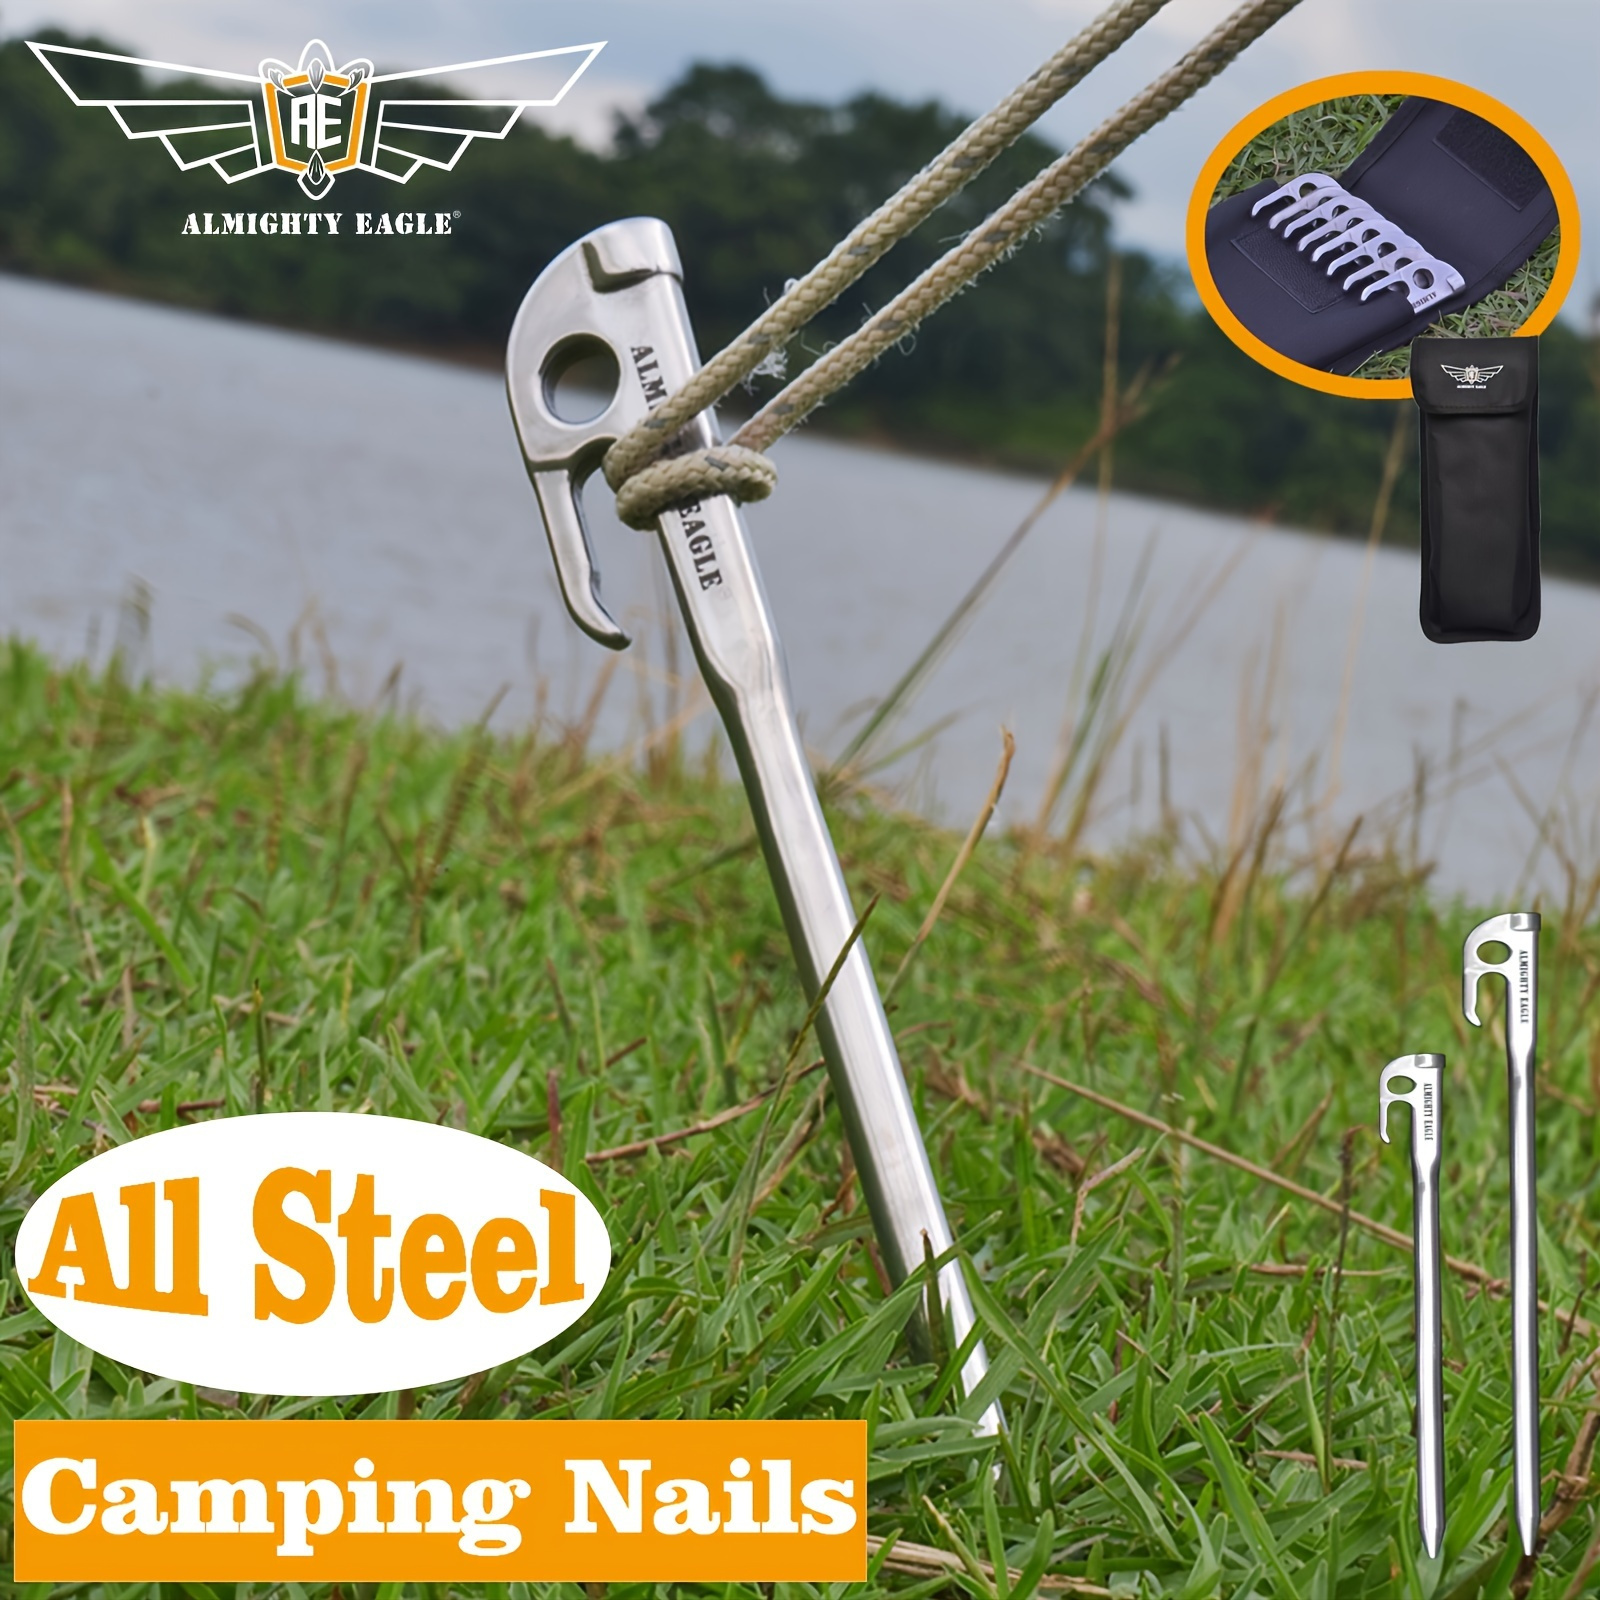 

1pc/8pcs 420 Stainless Steel High-strength Ground Nails, For Outdoor Camping, Tent Canopy Fixed Ground Stakes